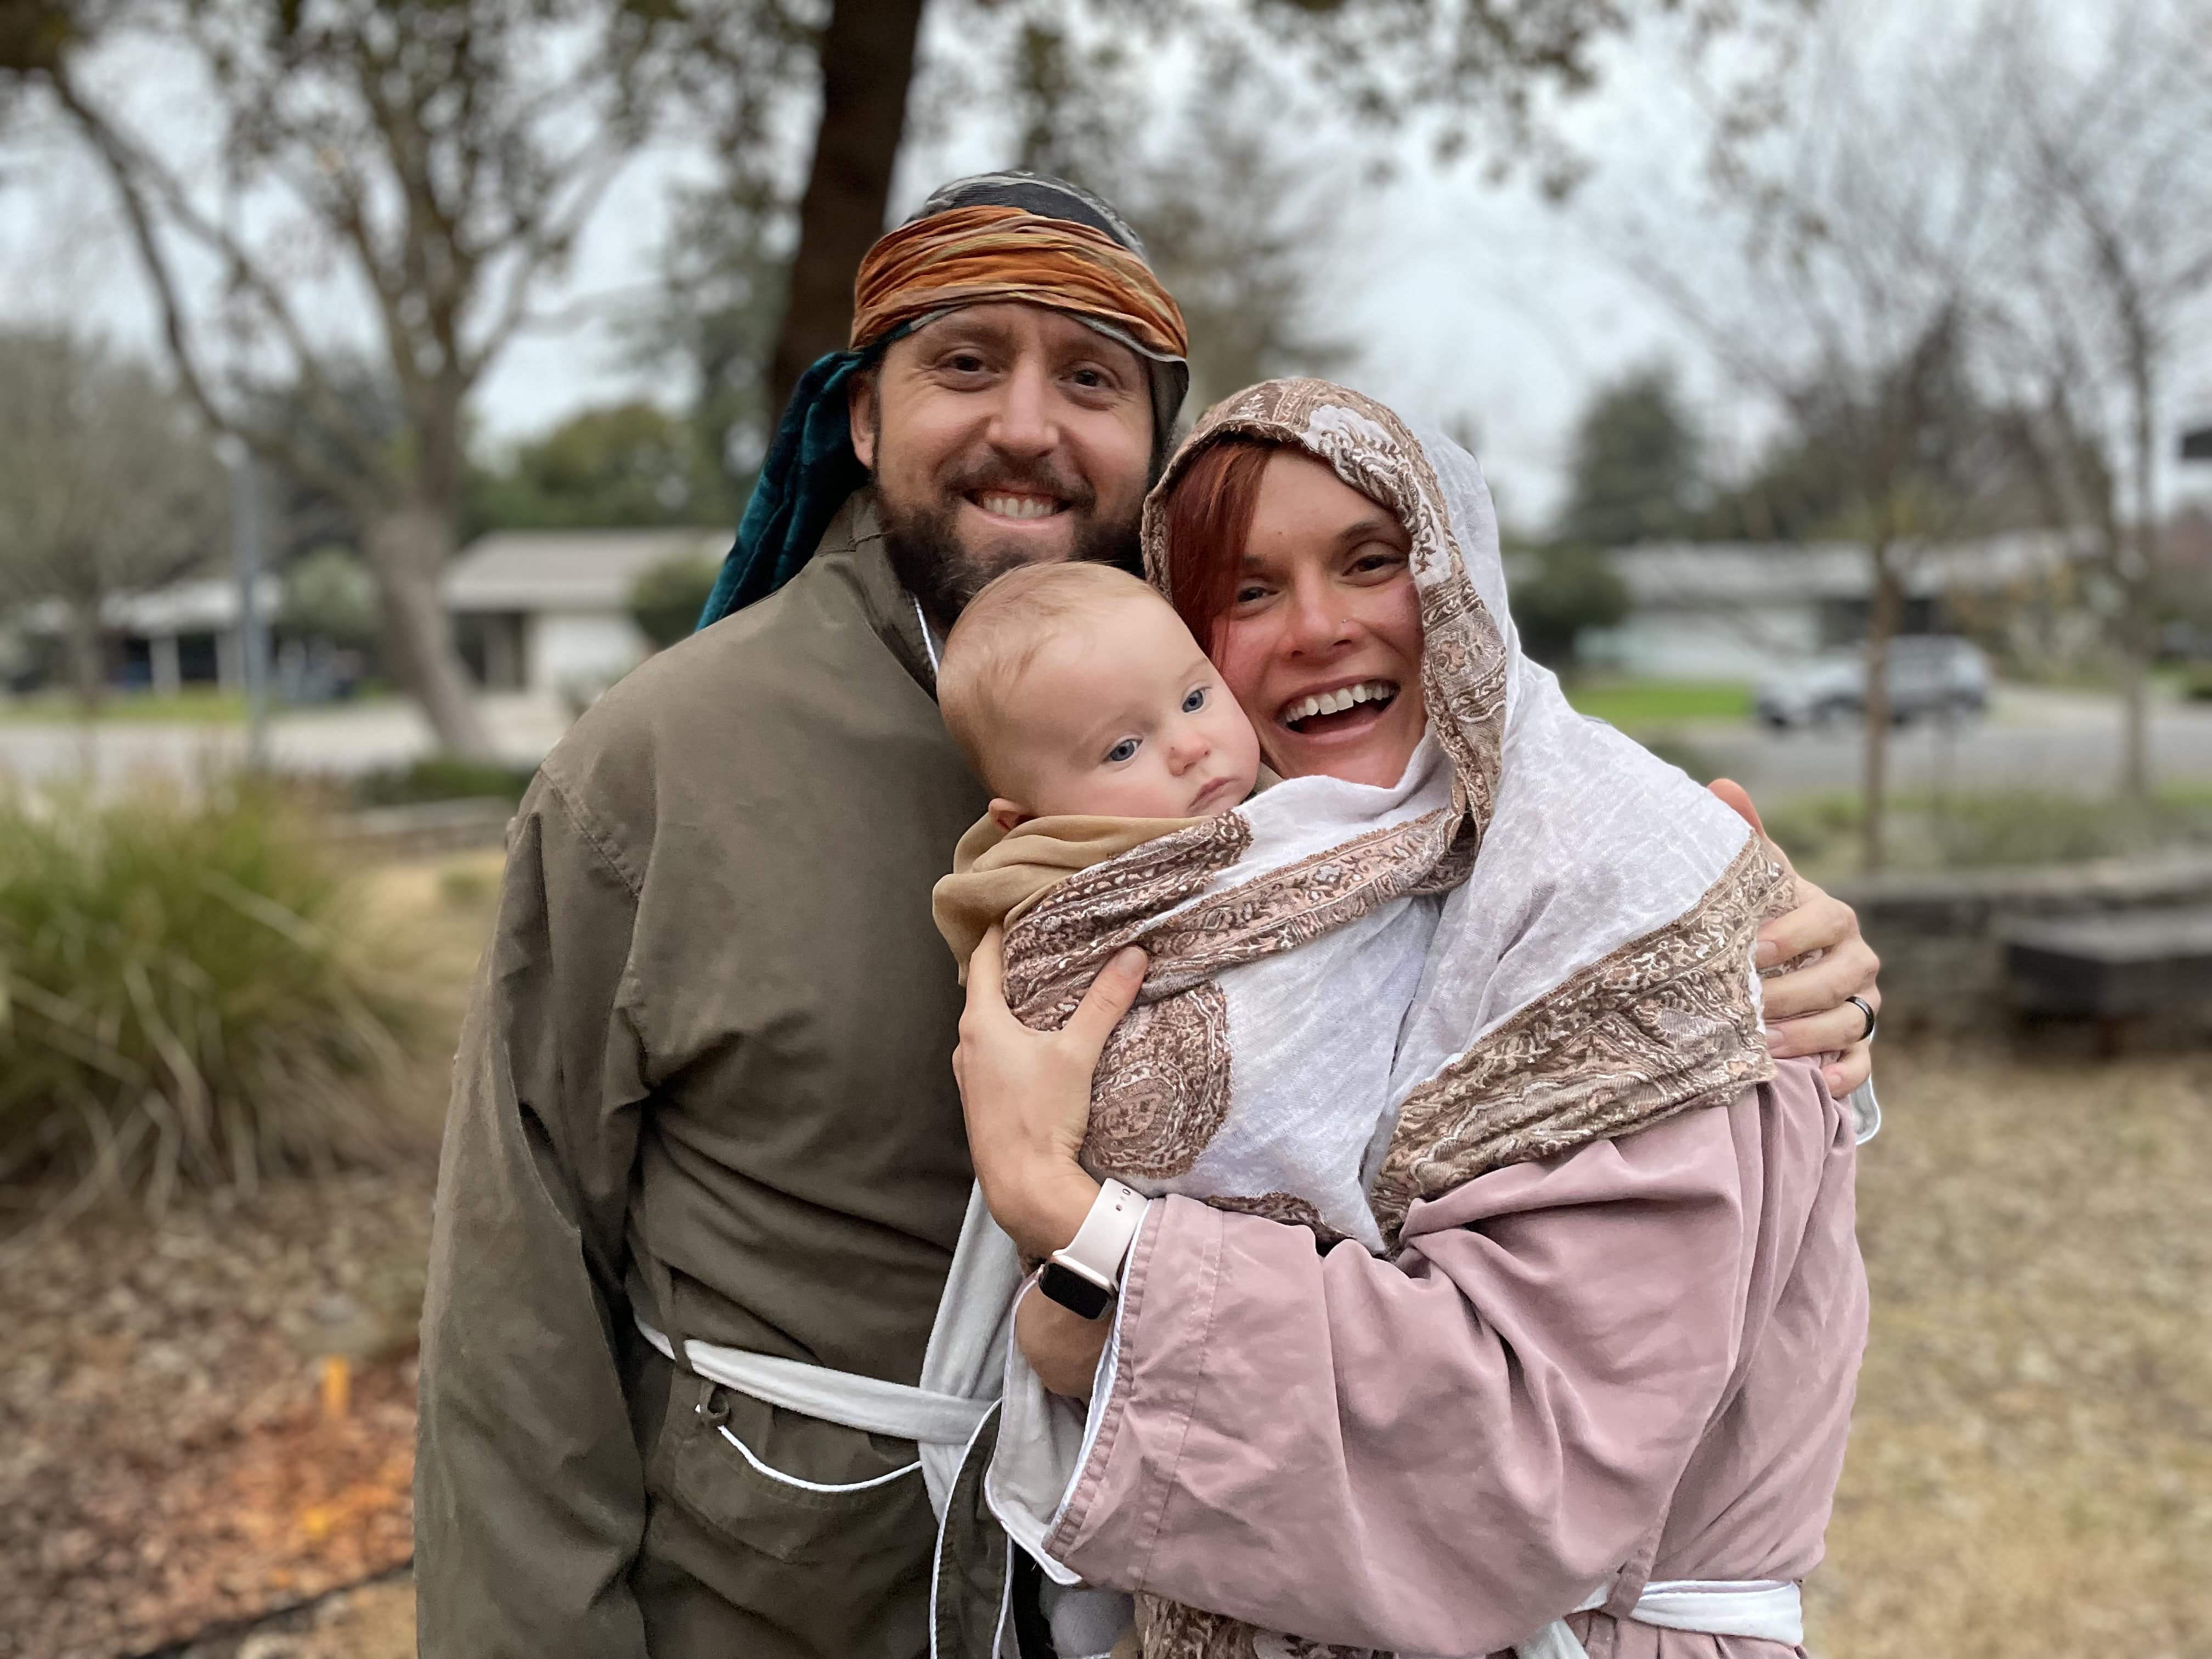 (Our "Holy Family" from last year, the Campbells)